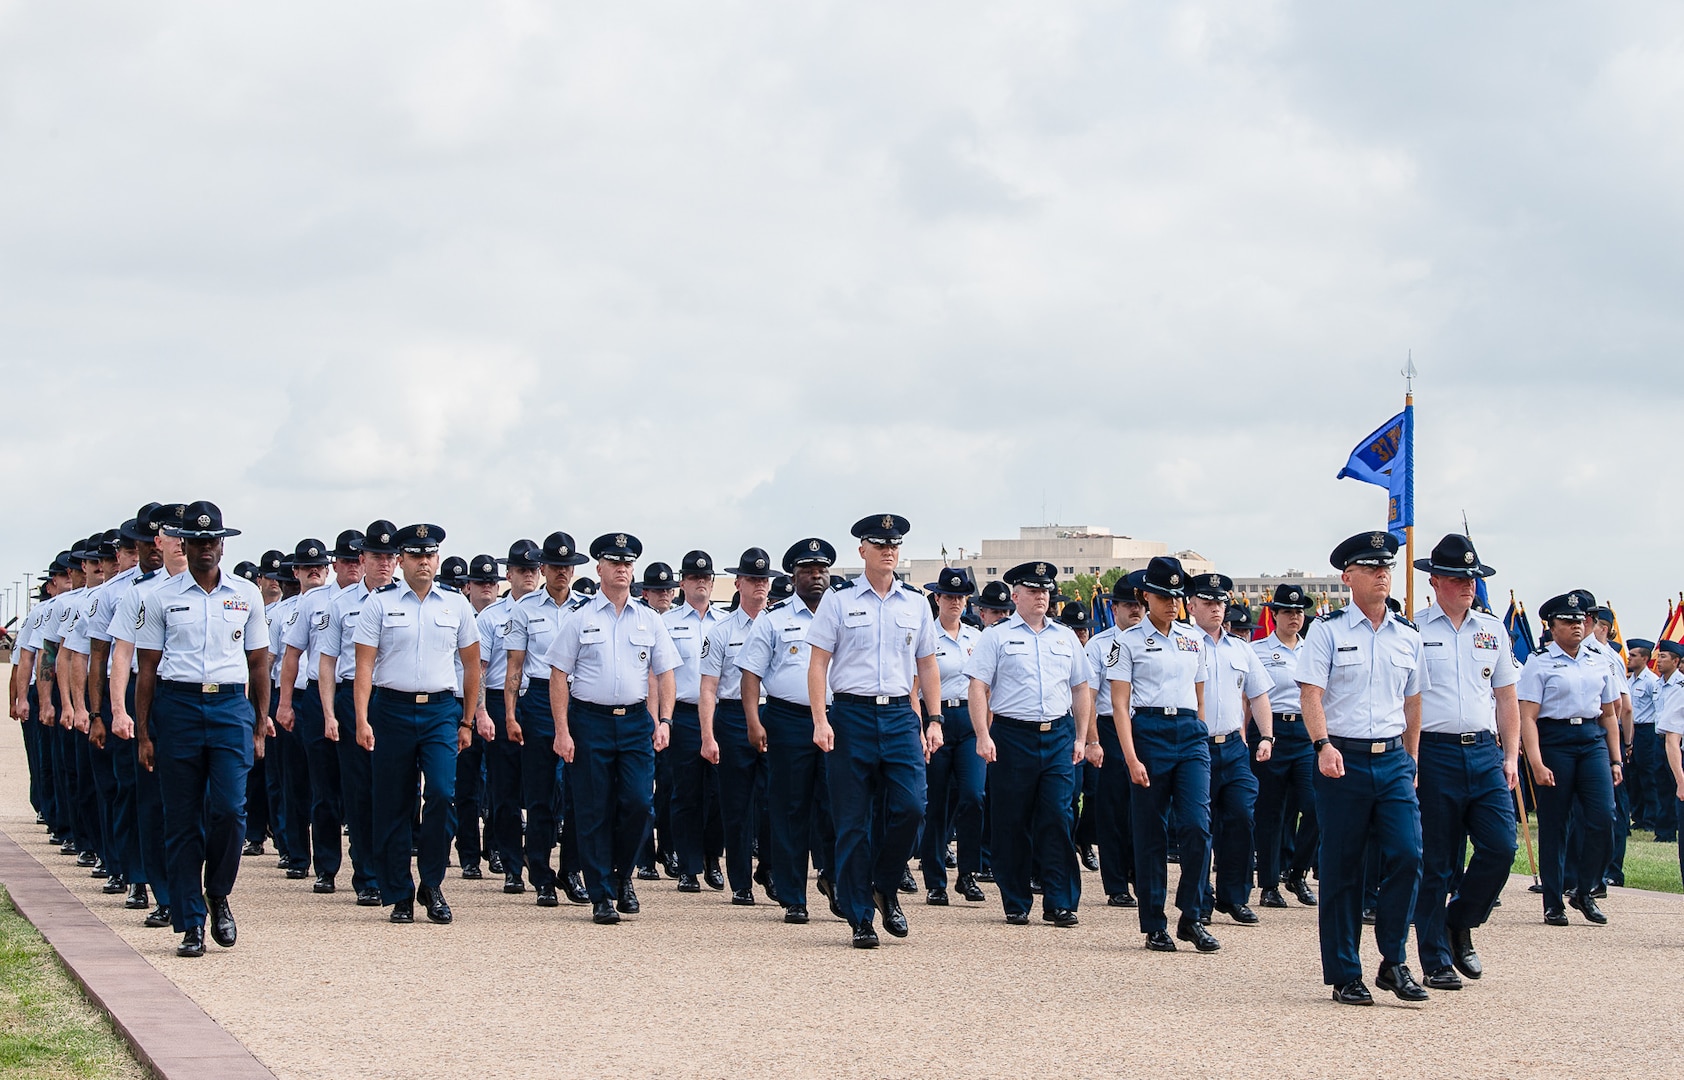 More than 600 Airmen assigned to the 433rd Training Squadron graduated from Basic Military Training at Joint Base San Antonio-Lackland, Texas, June 8-9 2022